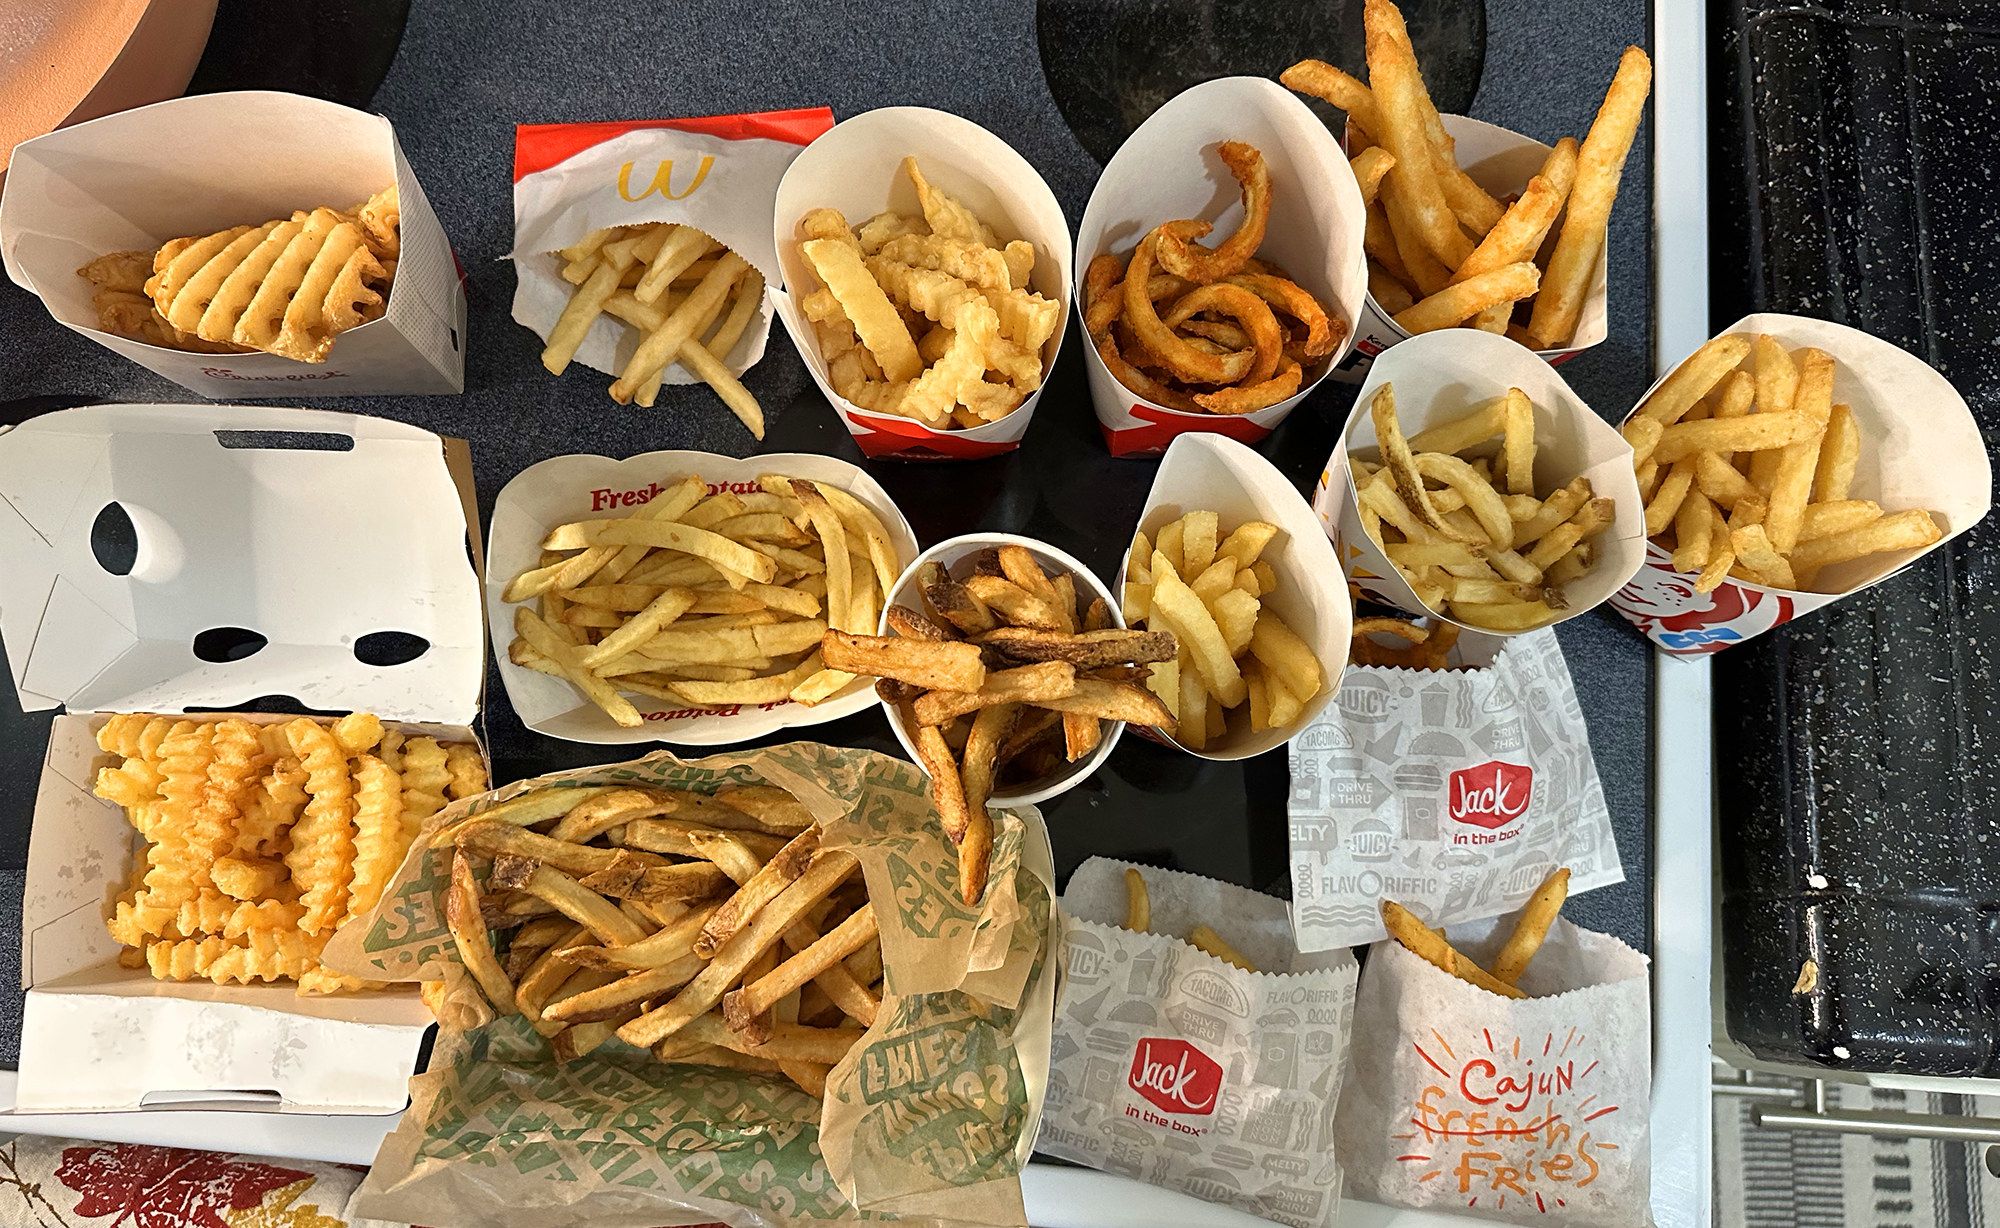 the various fries from different fast-food restaurants